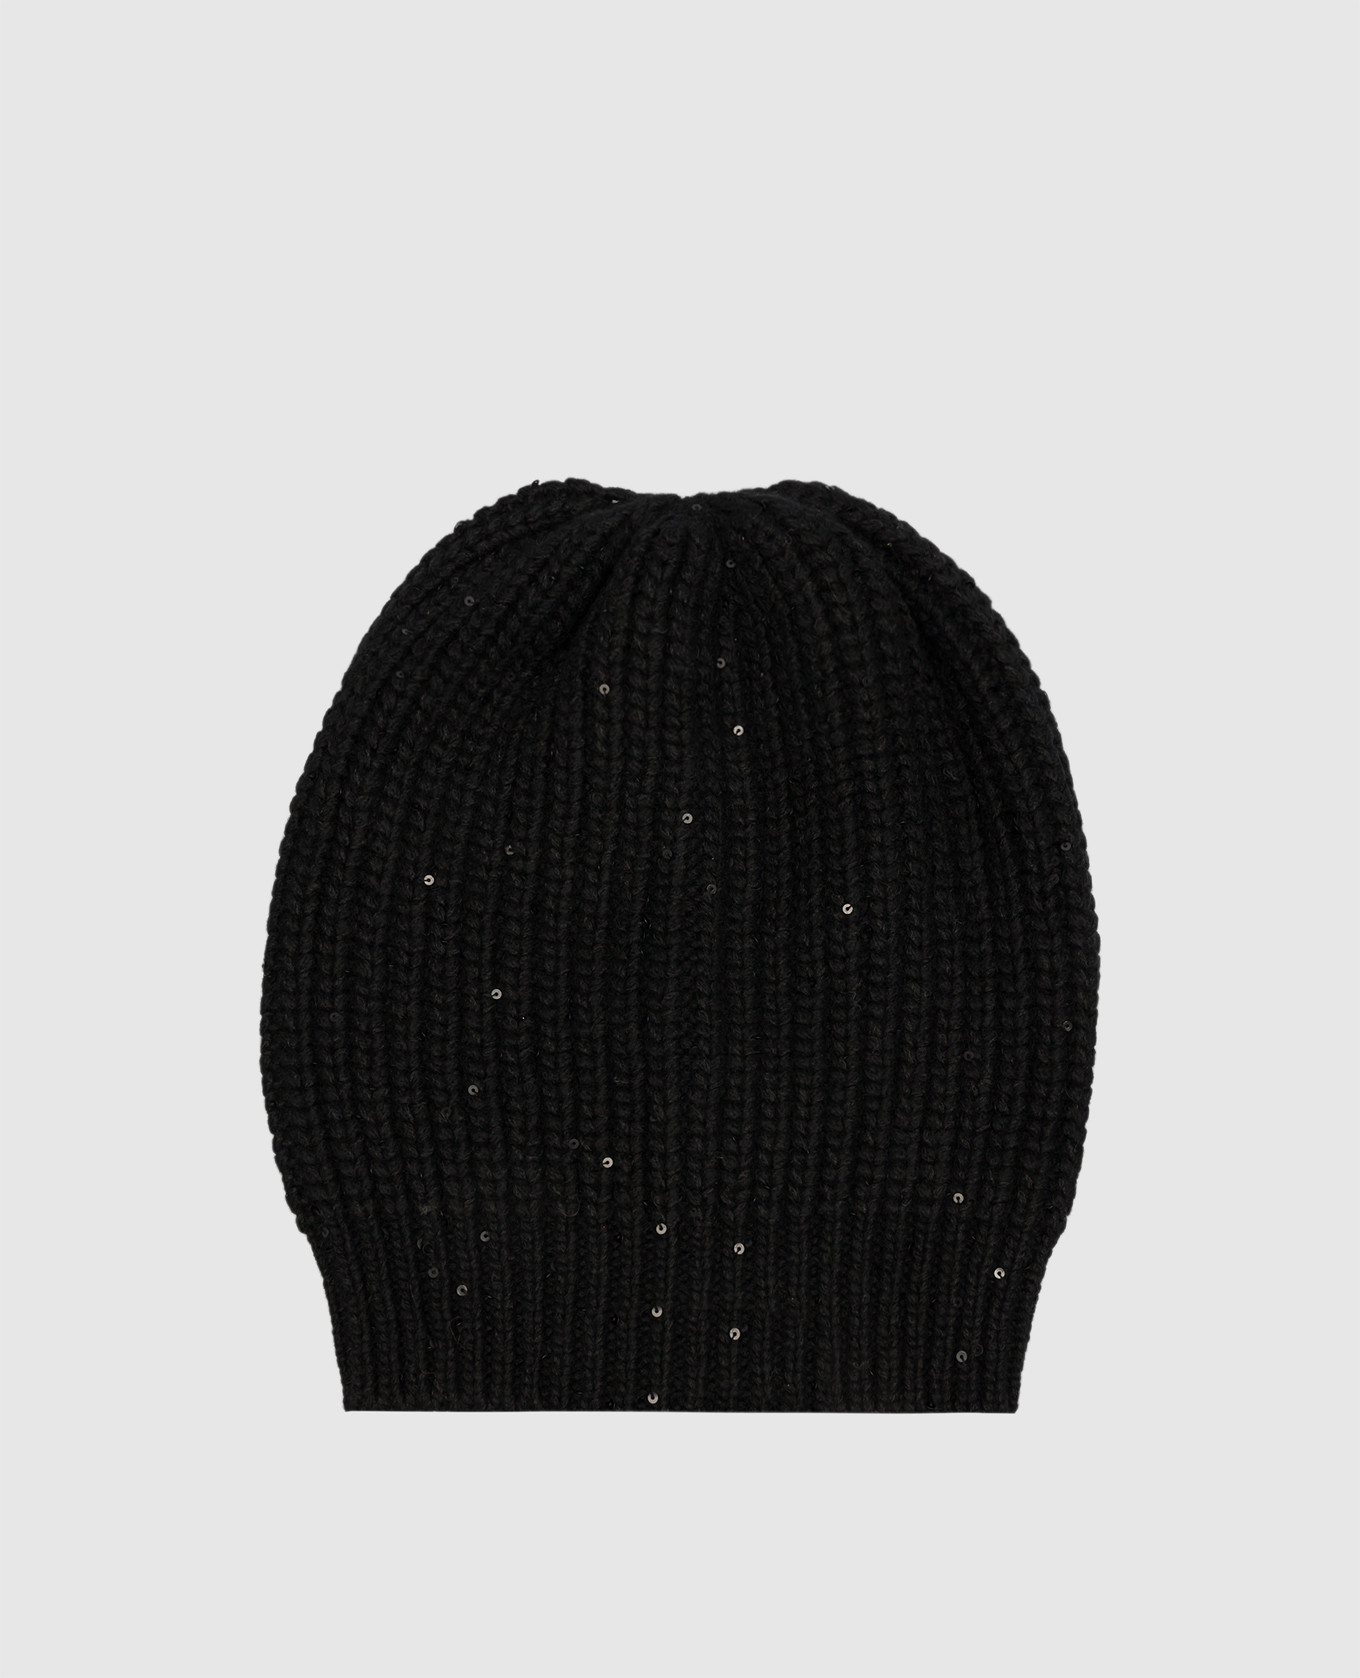 Black cap made of cashmere and silk with sequins